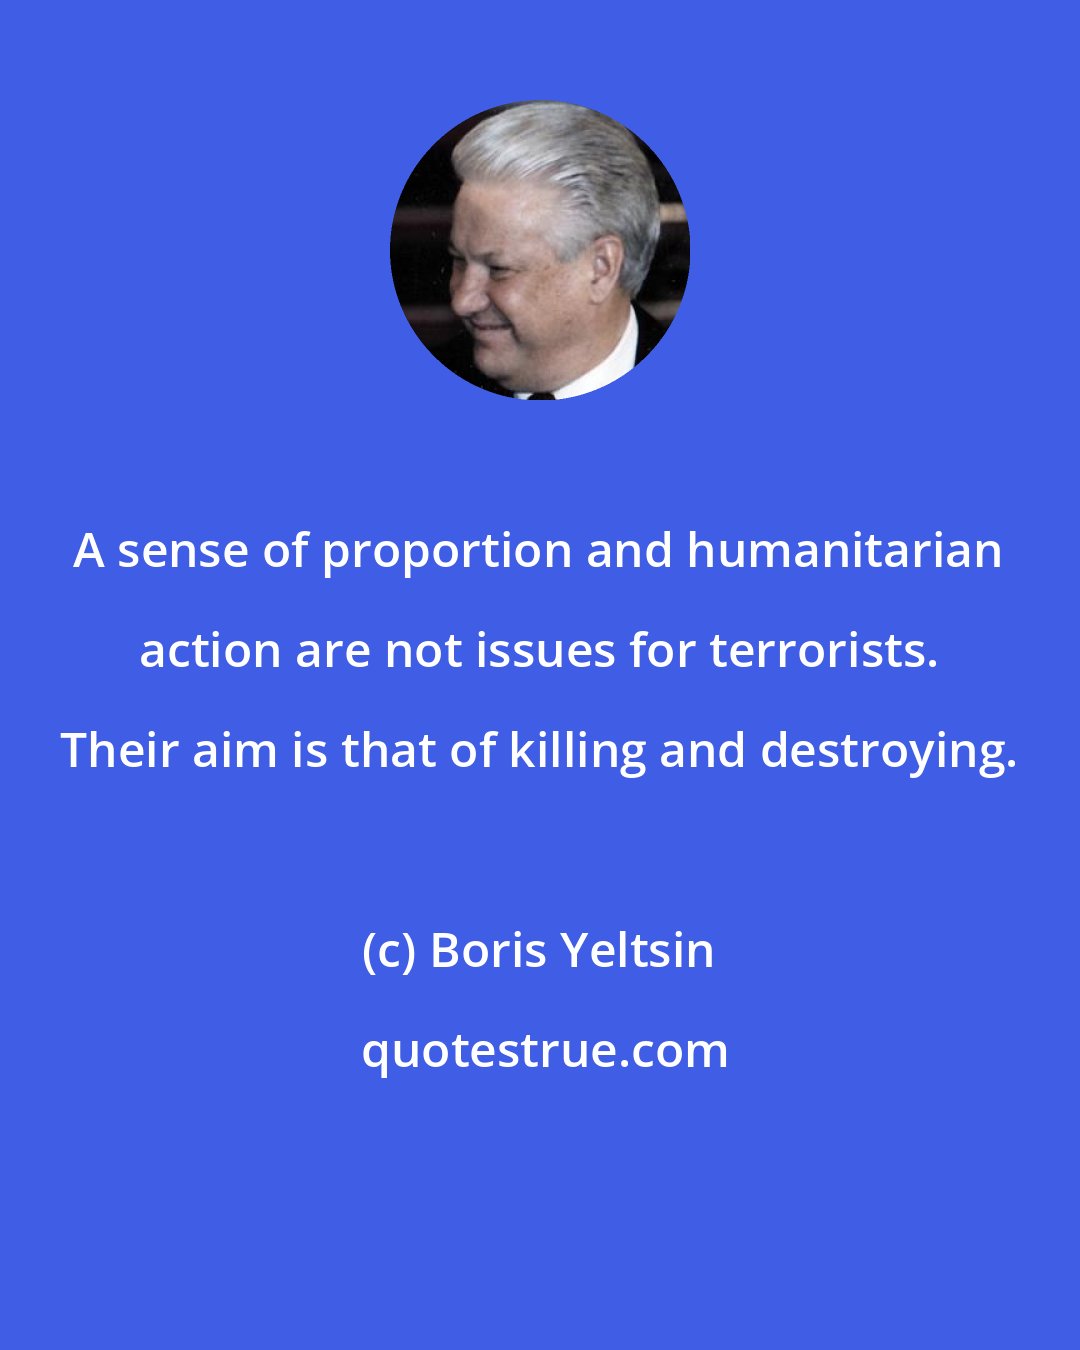 Boris Yeltsin: A sense of proportion and humanitarian action are not issues for terrorists. Their aim is that of killing and destroying.